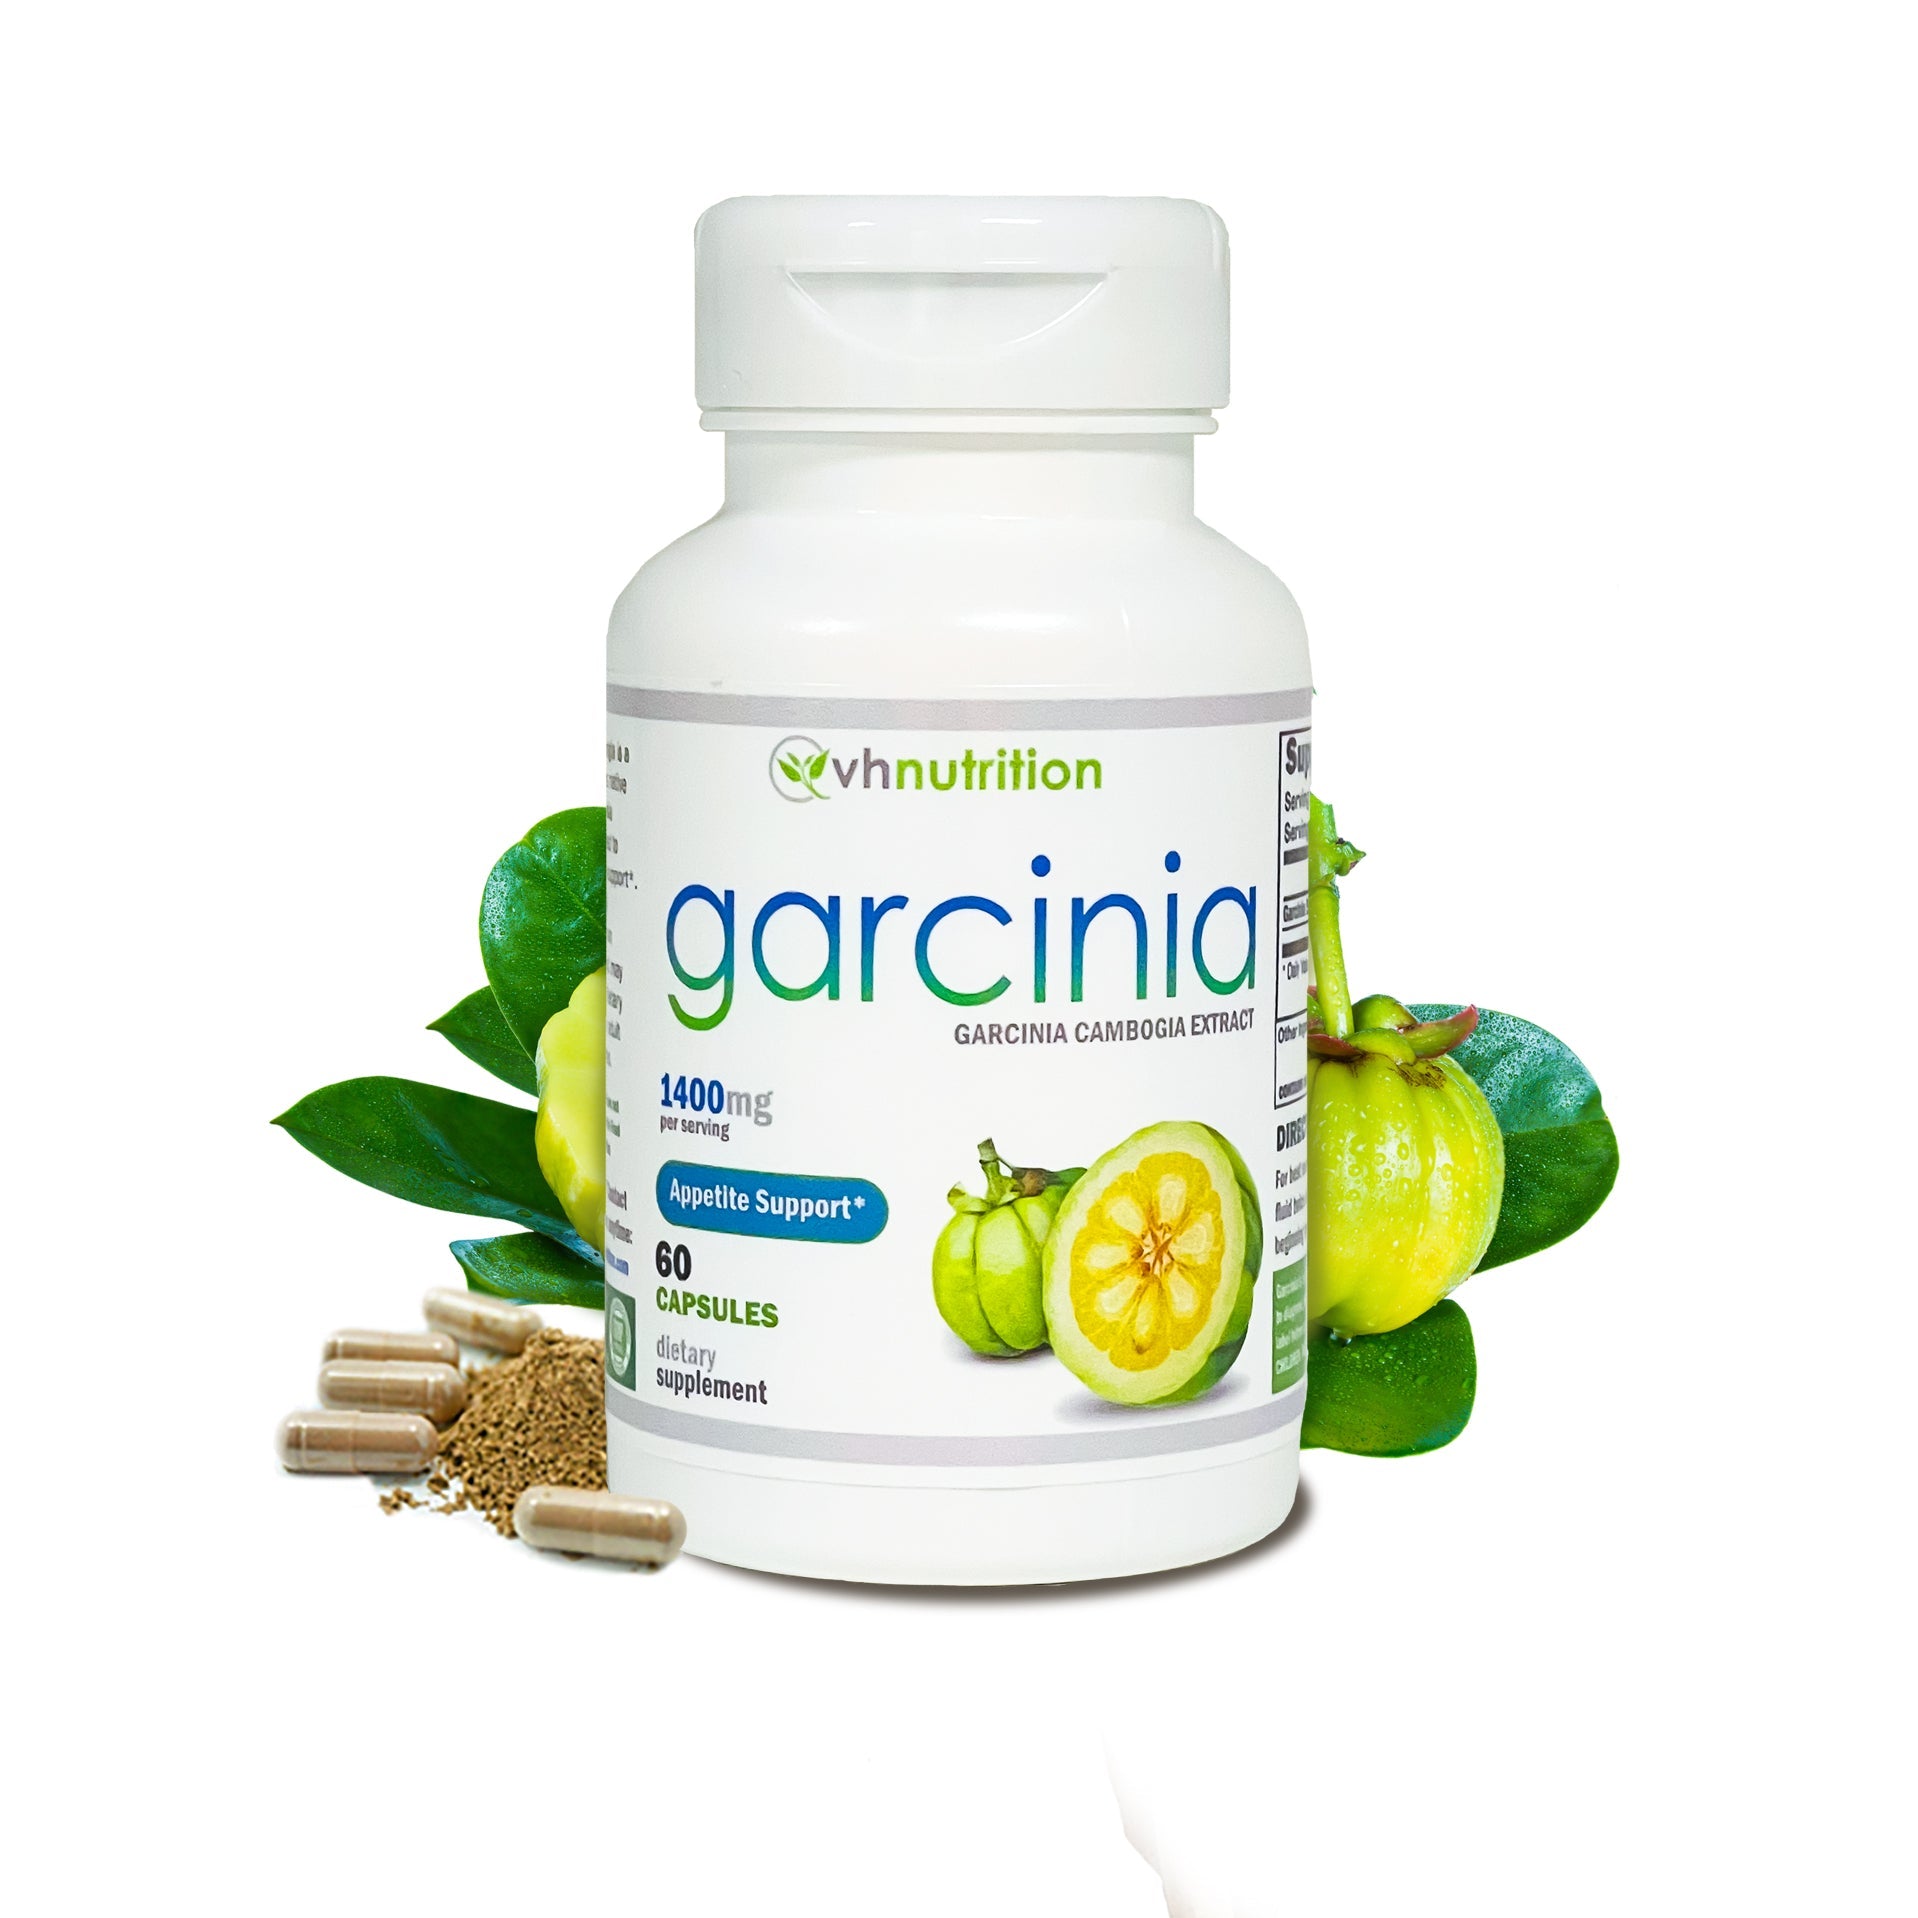 VH Nutrition GARCINIA CAMBOGIA | Appetite Suppressant* and Control* Supplement | 1400mg Proprietary Formula | 60 Capsules